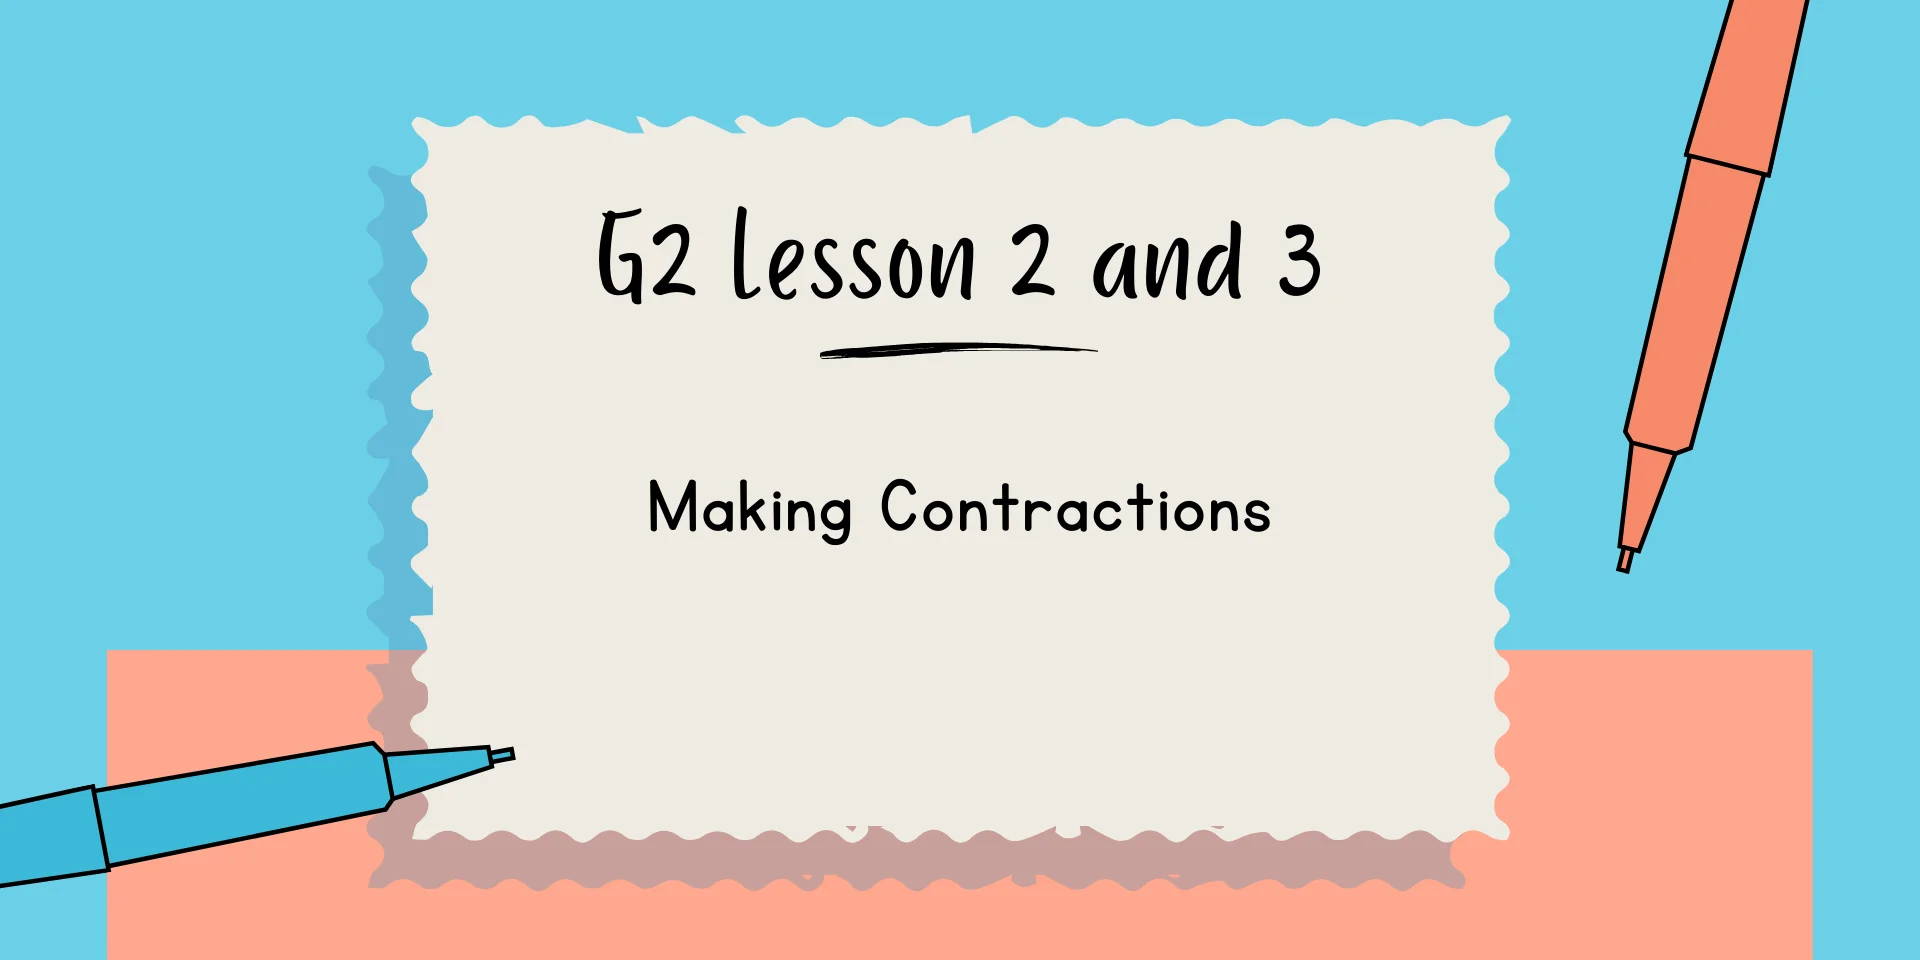 G2 Lesson 2 and 3 Making Contractions